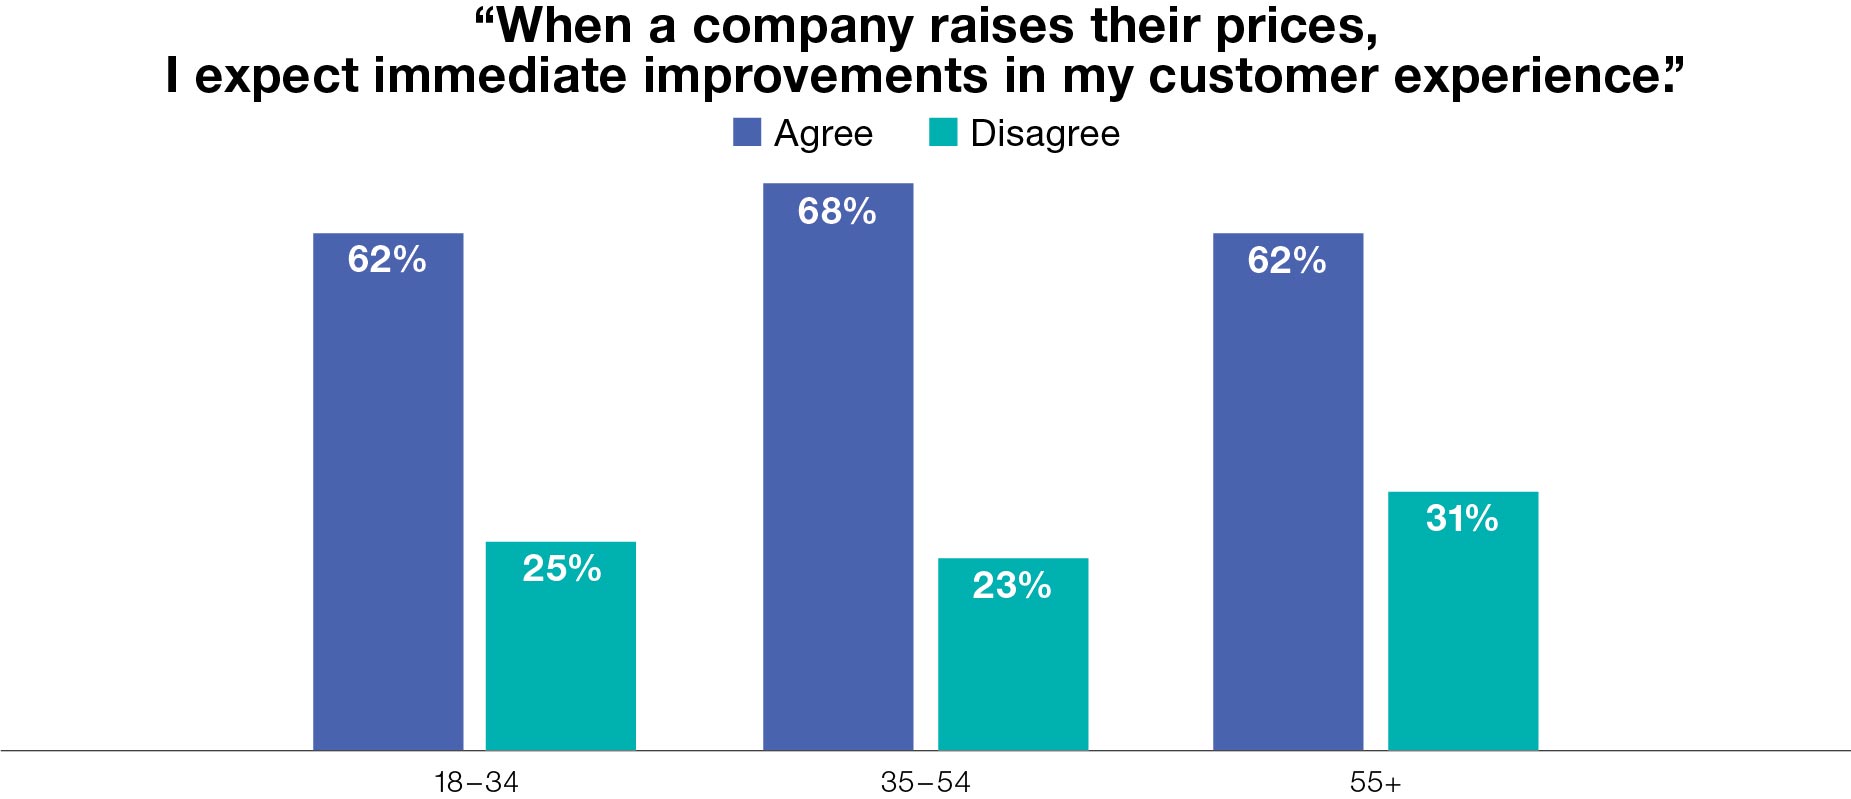 Who expects a raise in customer service when a company raises their prices by age